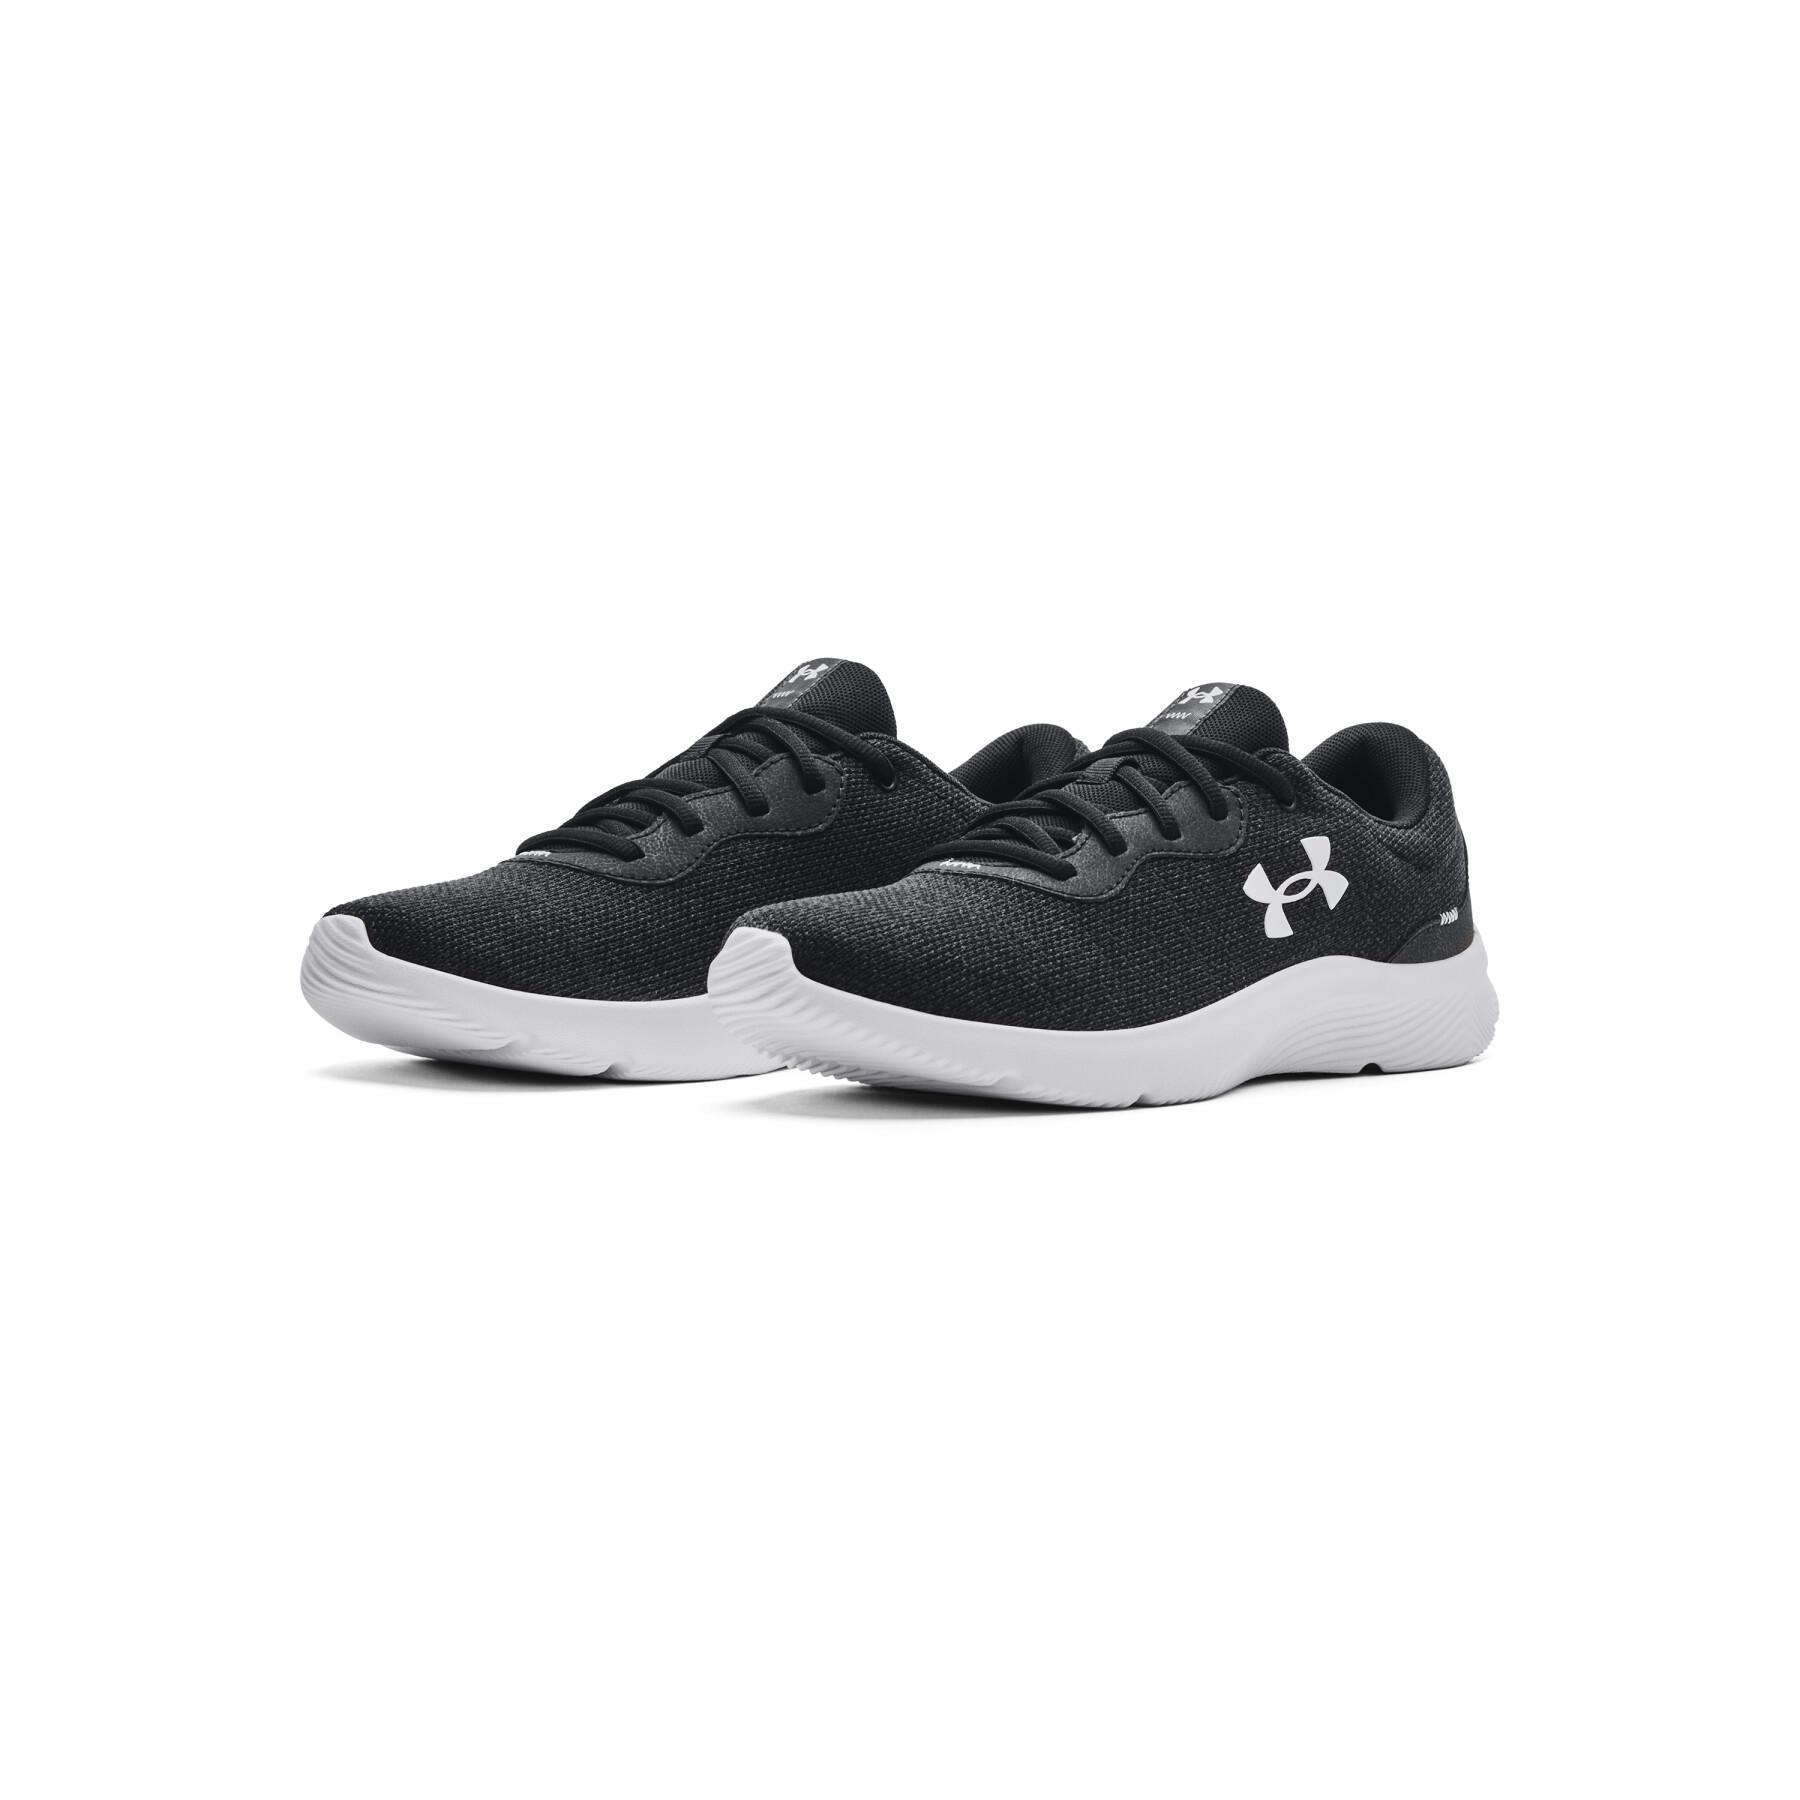 Chaussures de running Under Armour Mojo 2